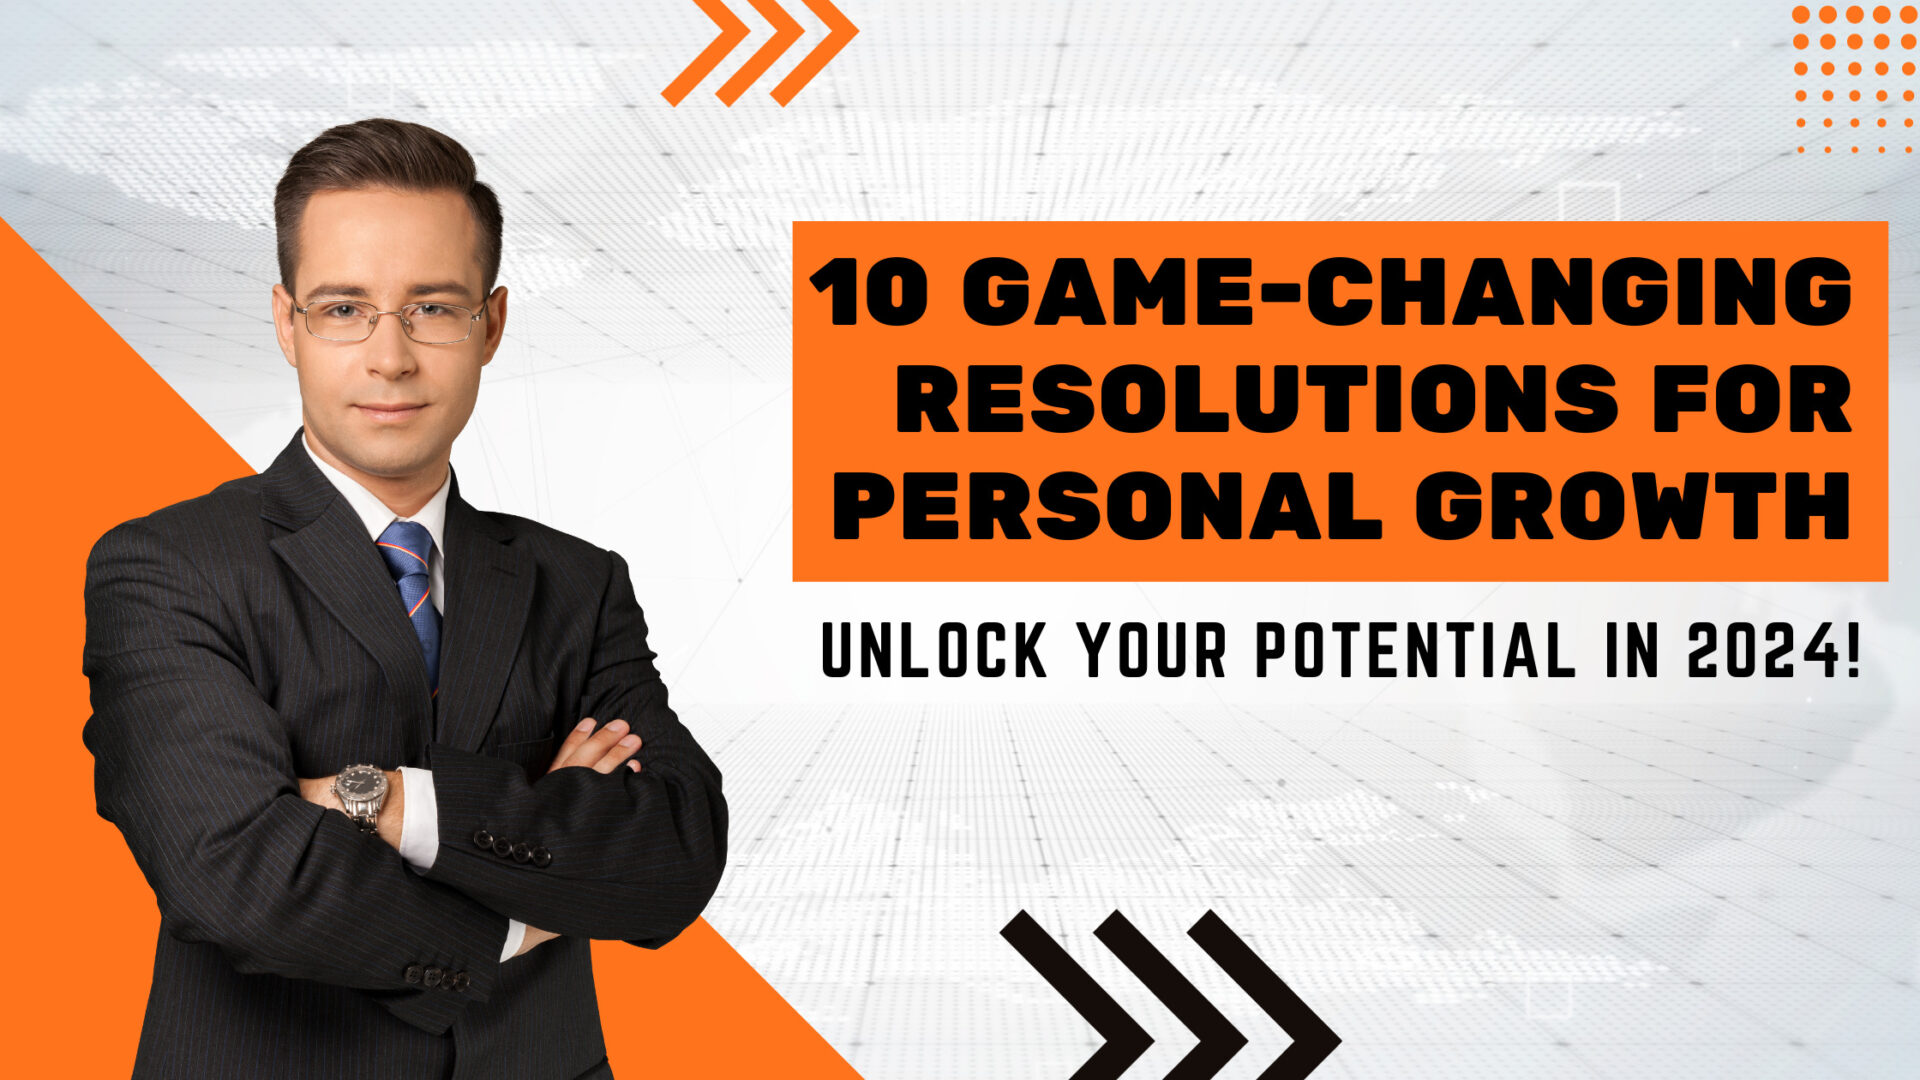 10 Game-Changing Resolutions for Personal Growth: Unlock Your Potential in 2024!